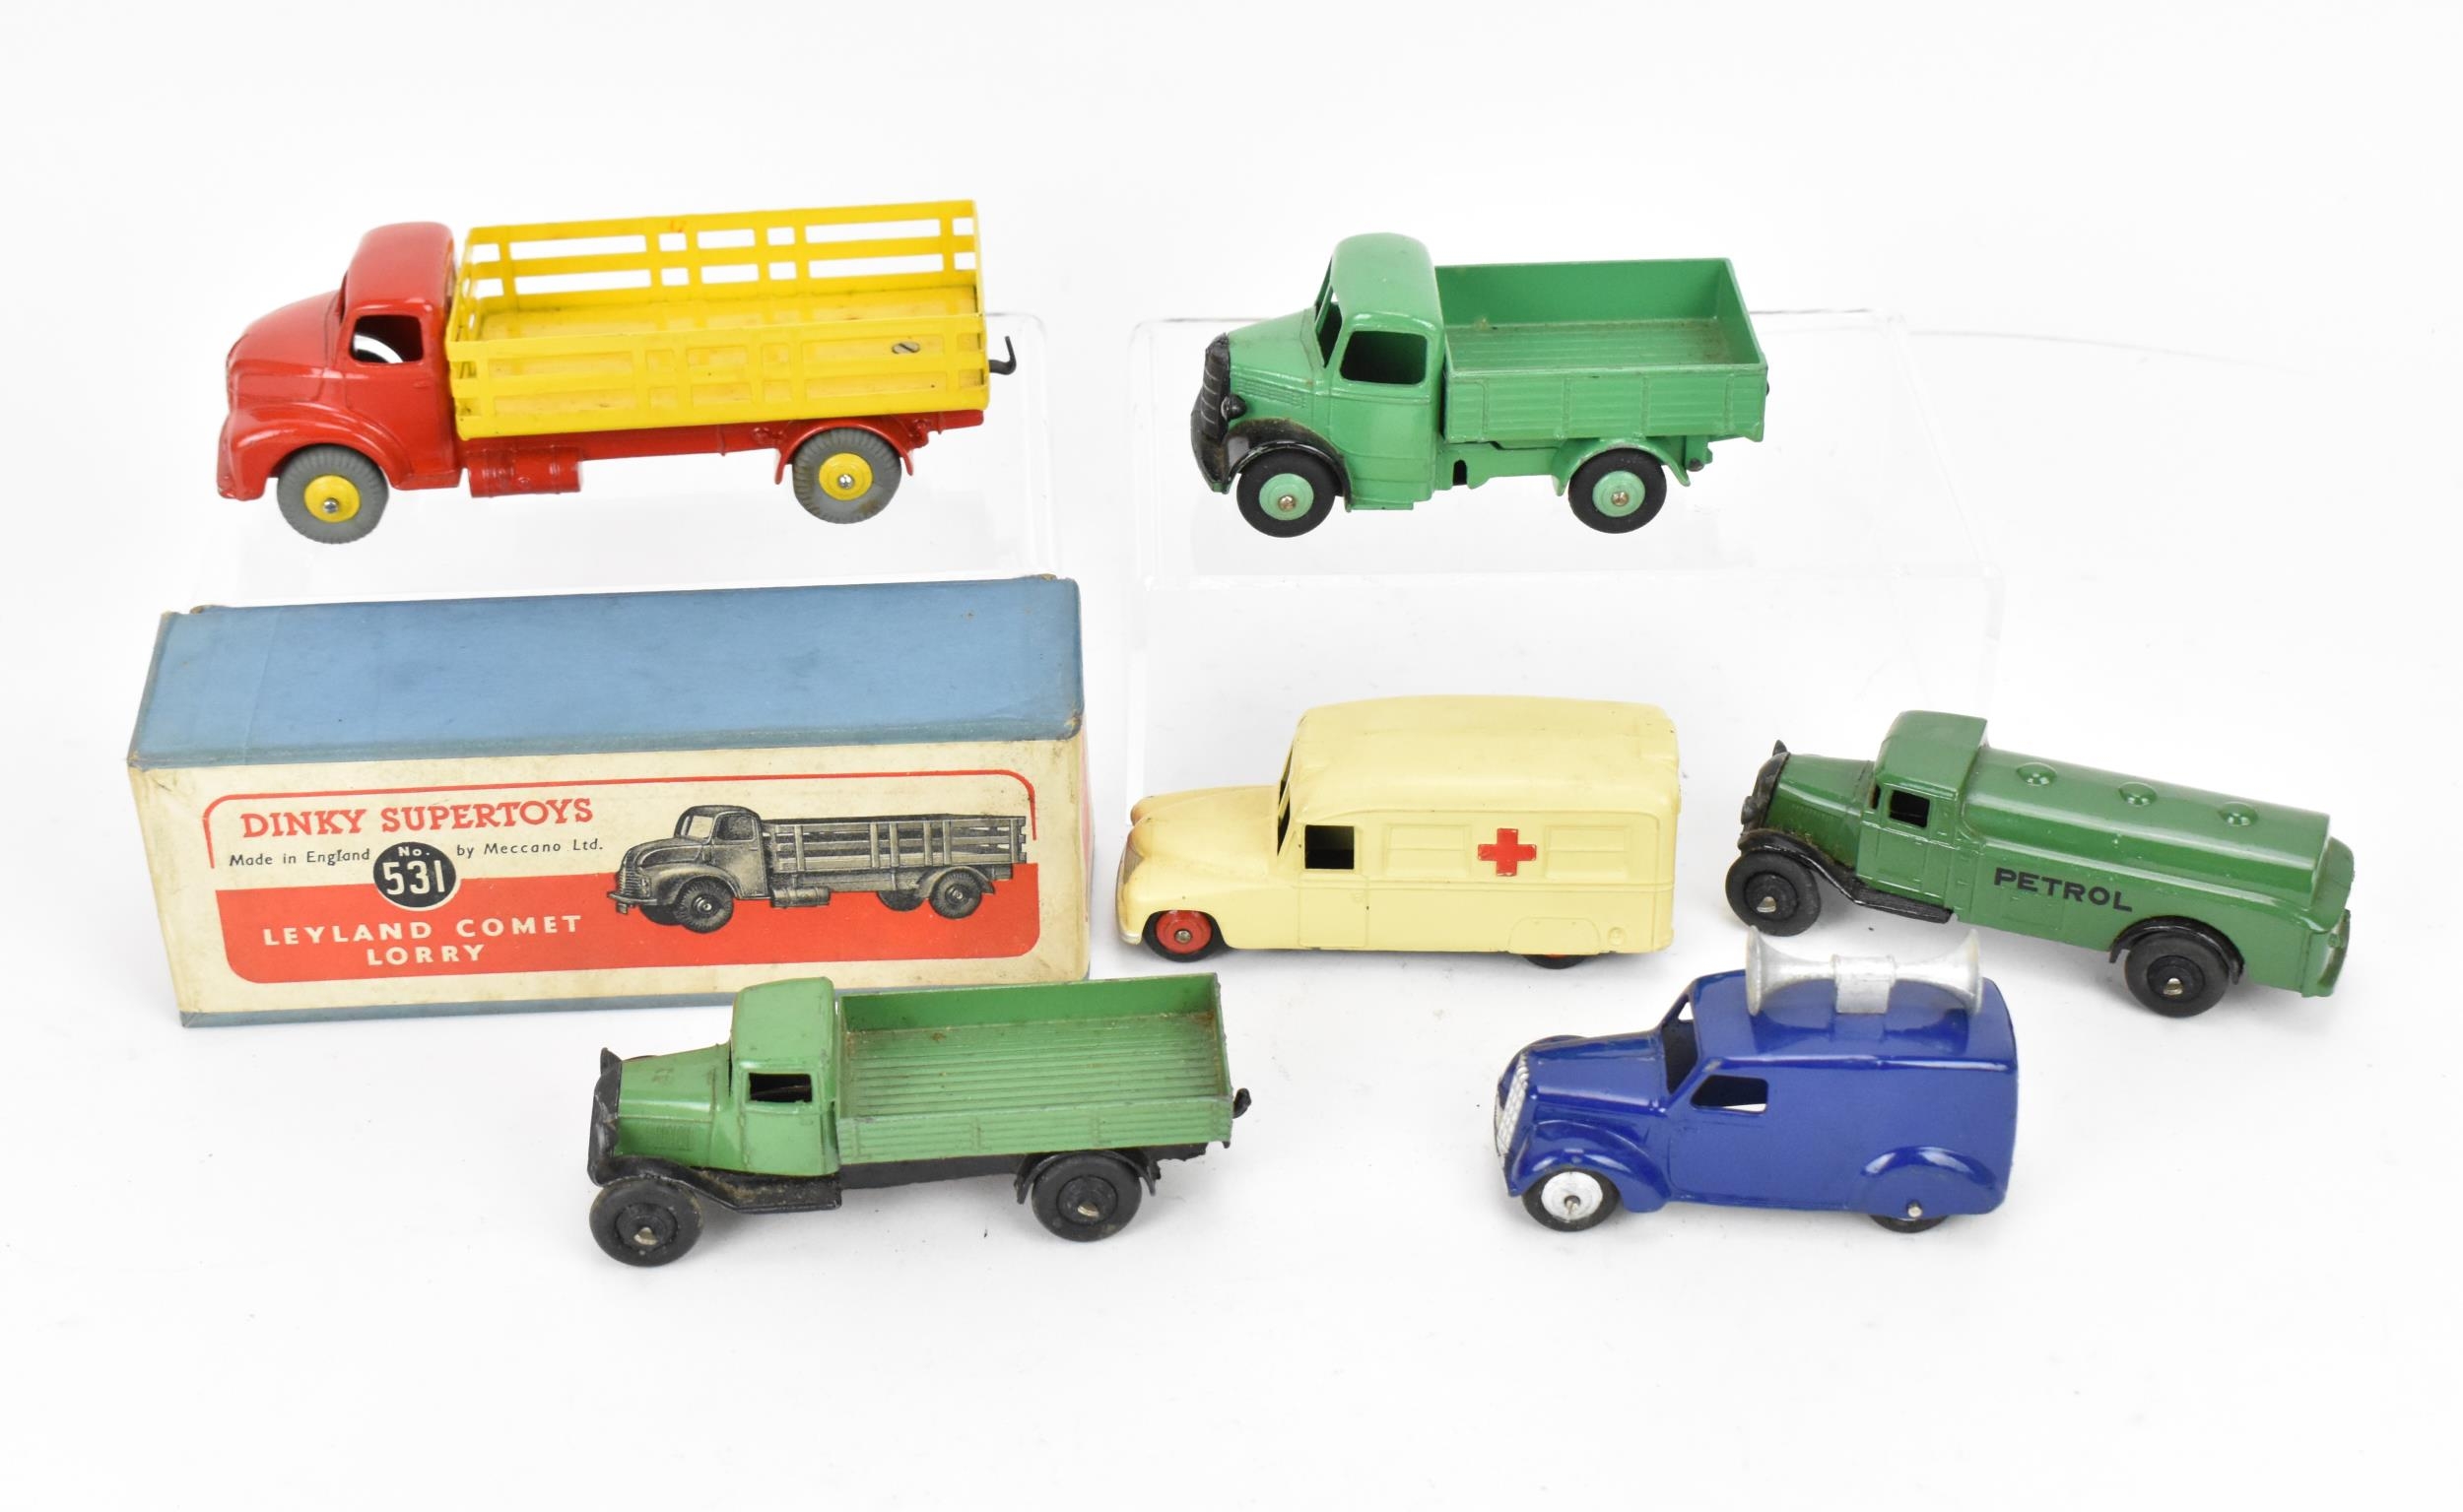 A Dinky Supertoys 531 Leyland Comet Lorry, in yellow and red, in original cardboard box, together